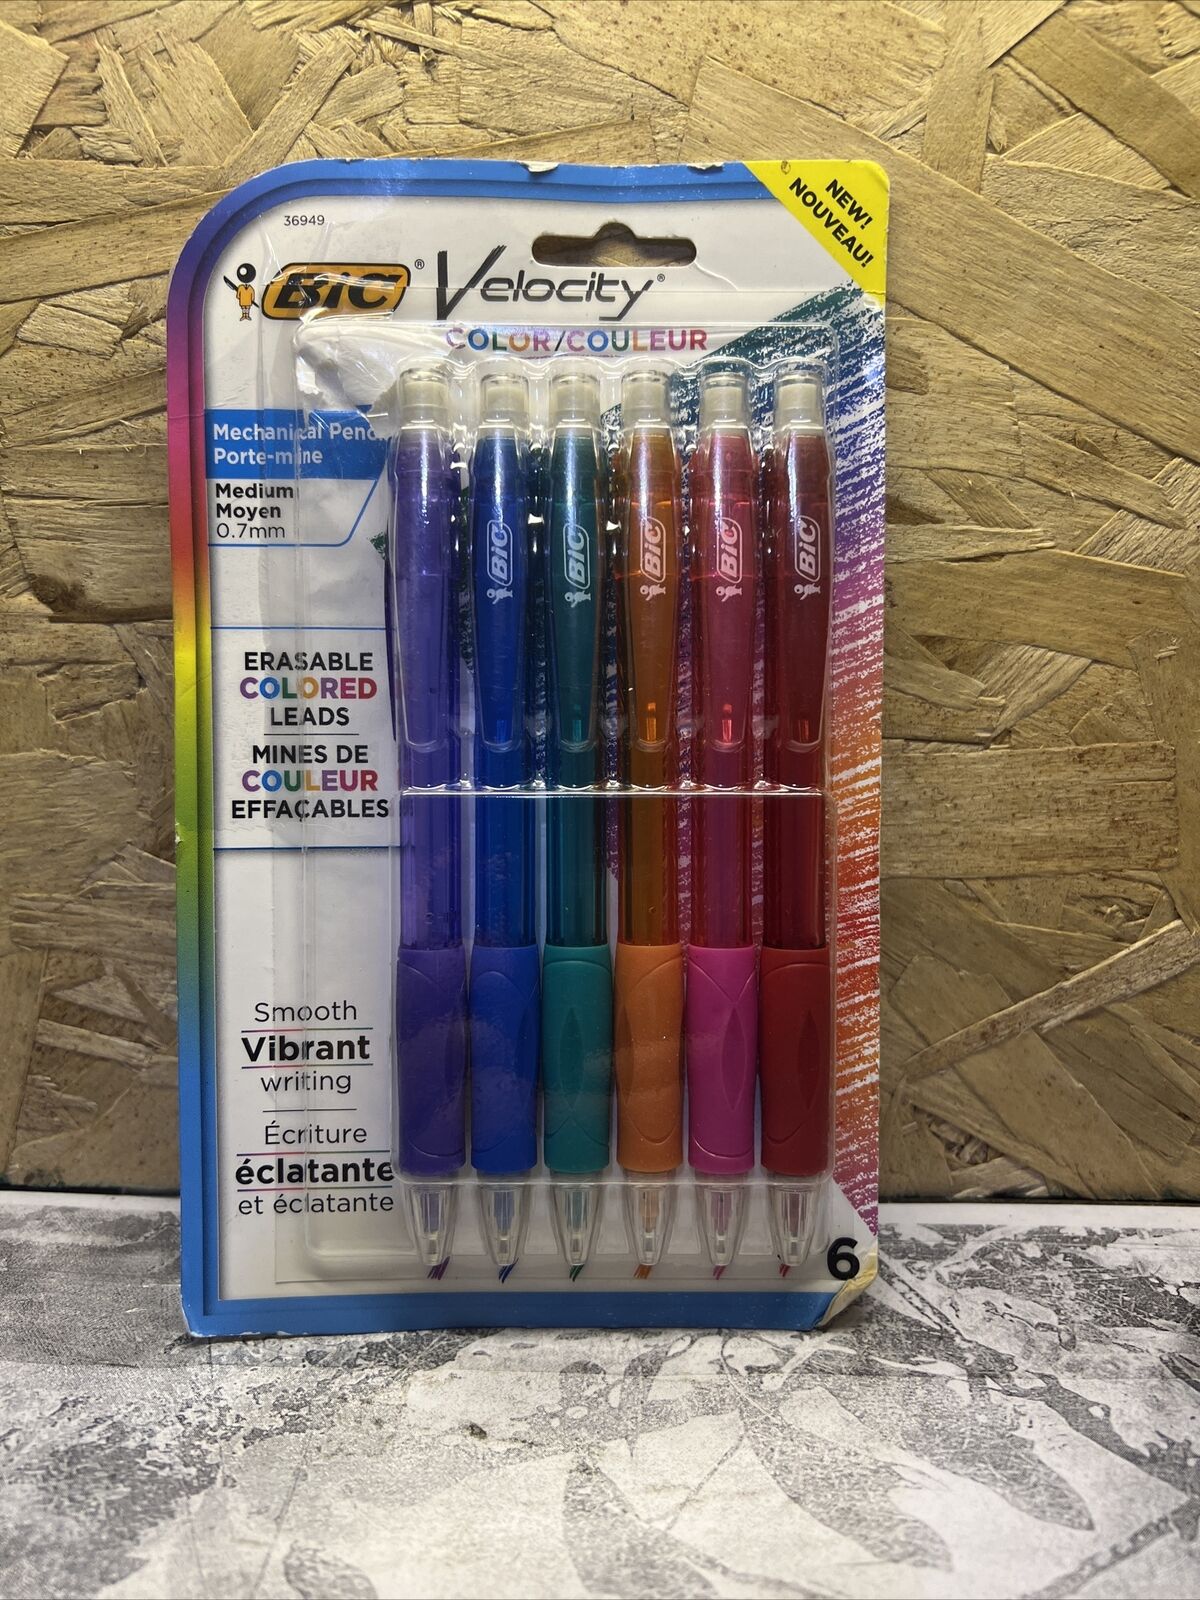 6 BIC Velocity Mechanical Pencils w Colored Leads Med. 0.7mm *OPEN BOX*